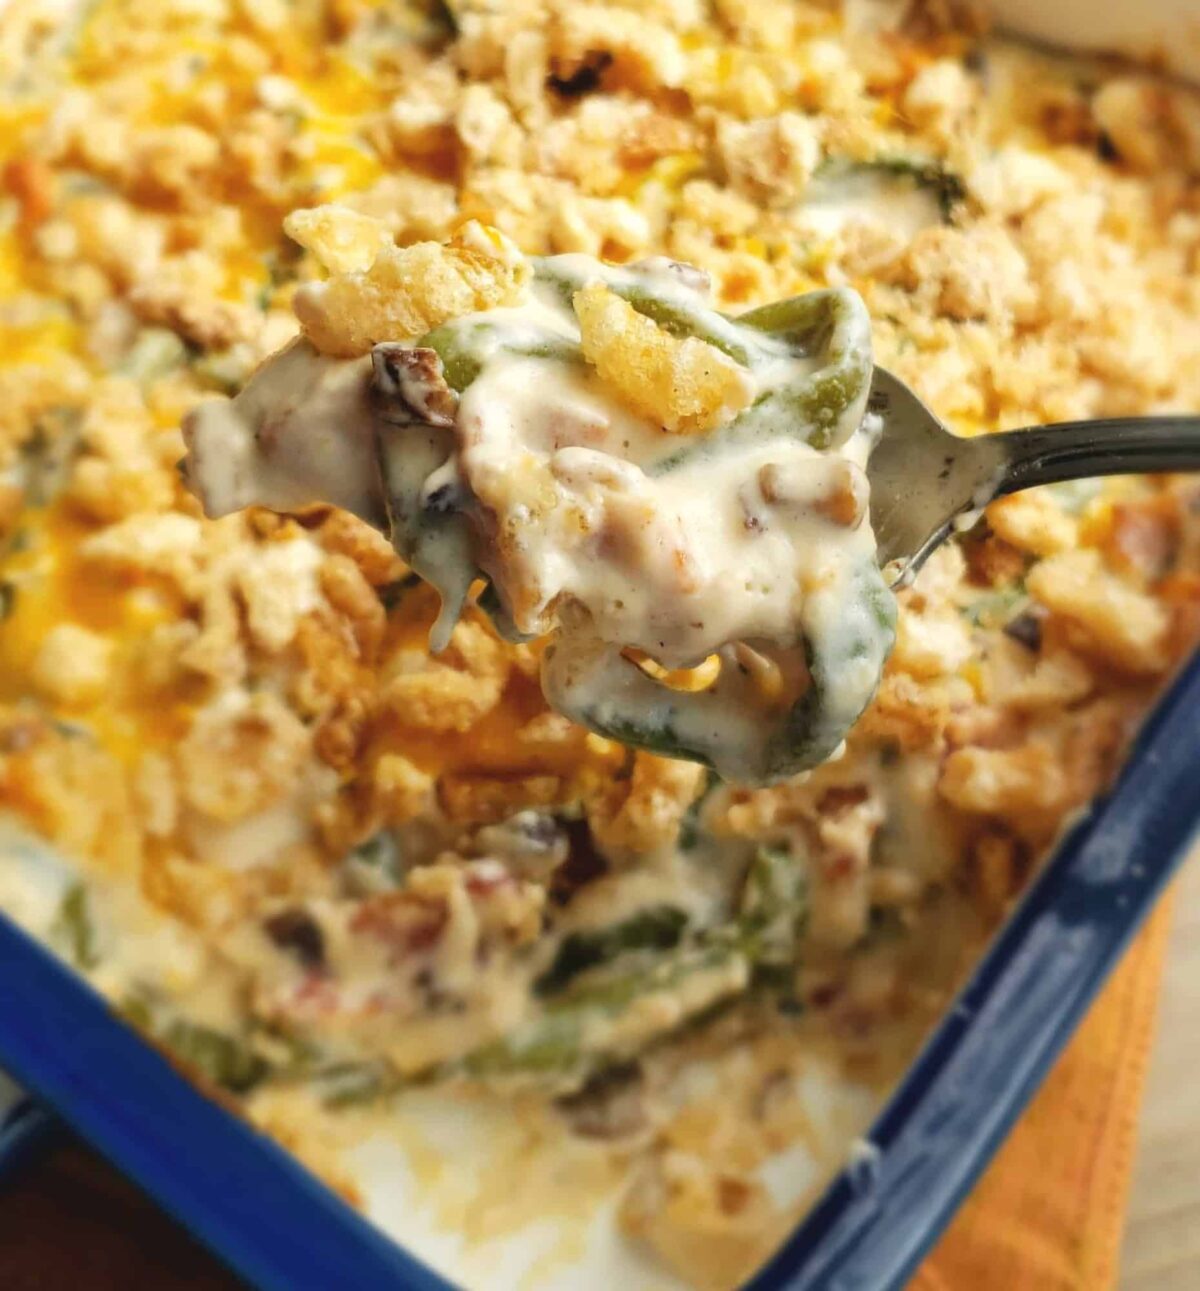 Keto and Gluten Free Green Bean casserole being scooped out of the dish and focus is on the spoonful